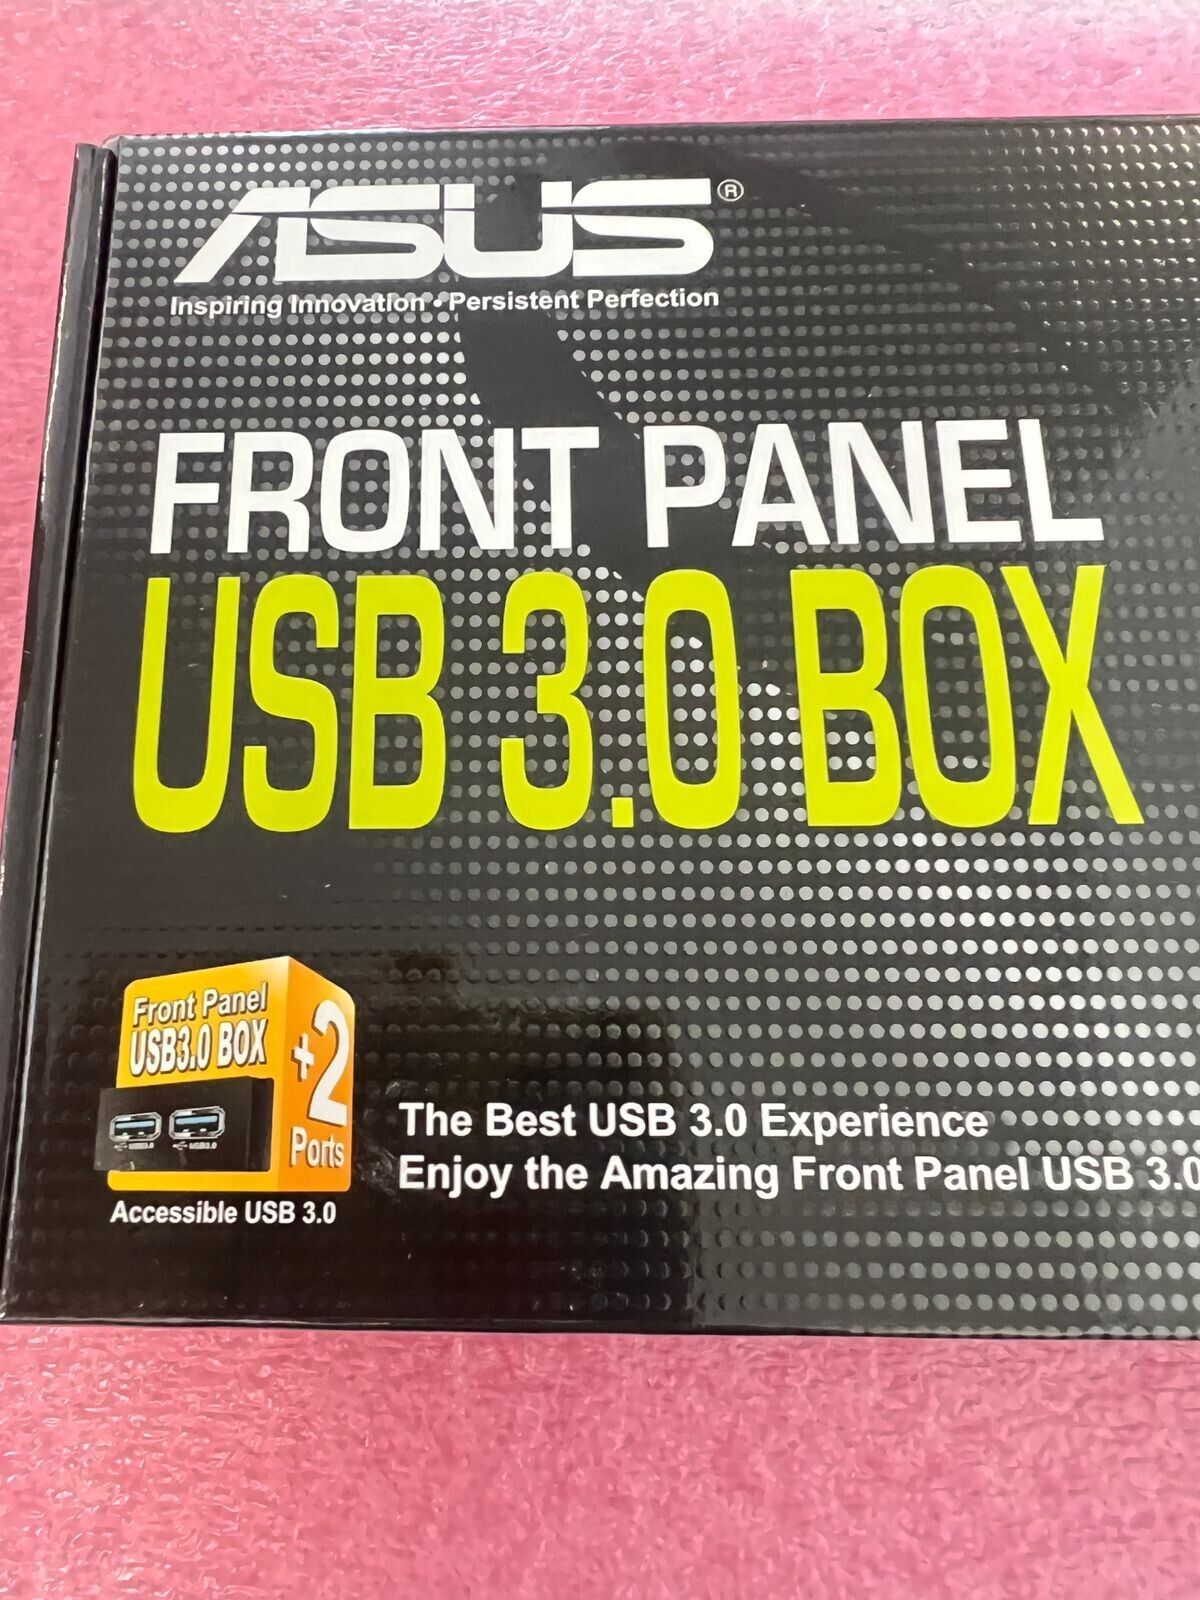 ASUS Front Panel USB 3.0 Port Box Expansion for 3.5 Inch Slot Chassis Enclosure